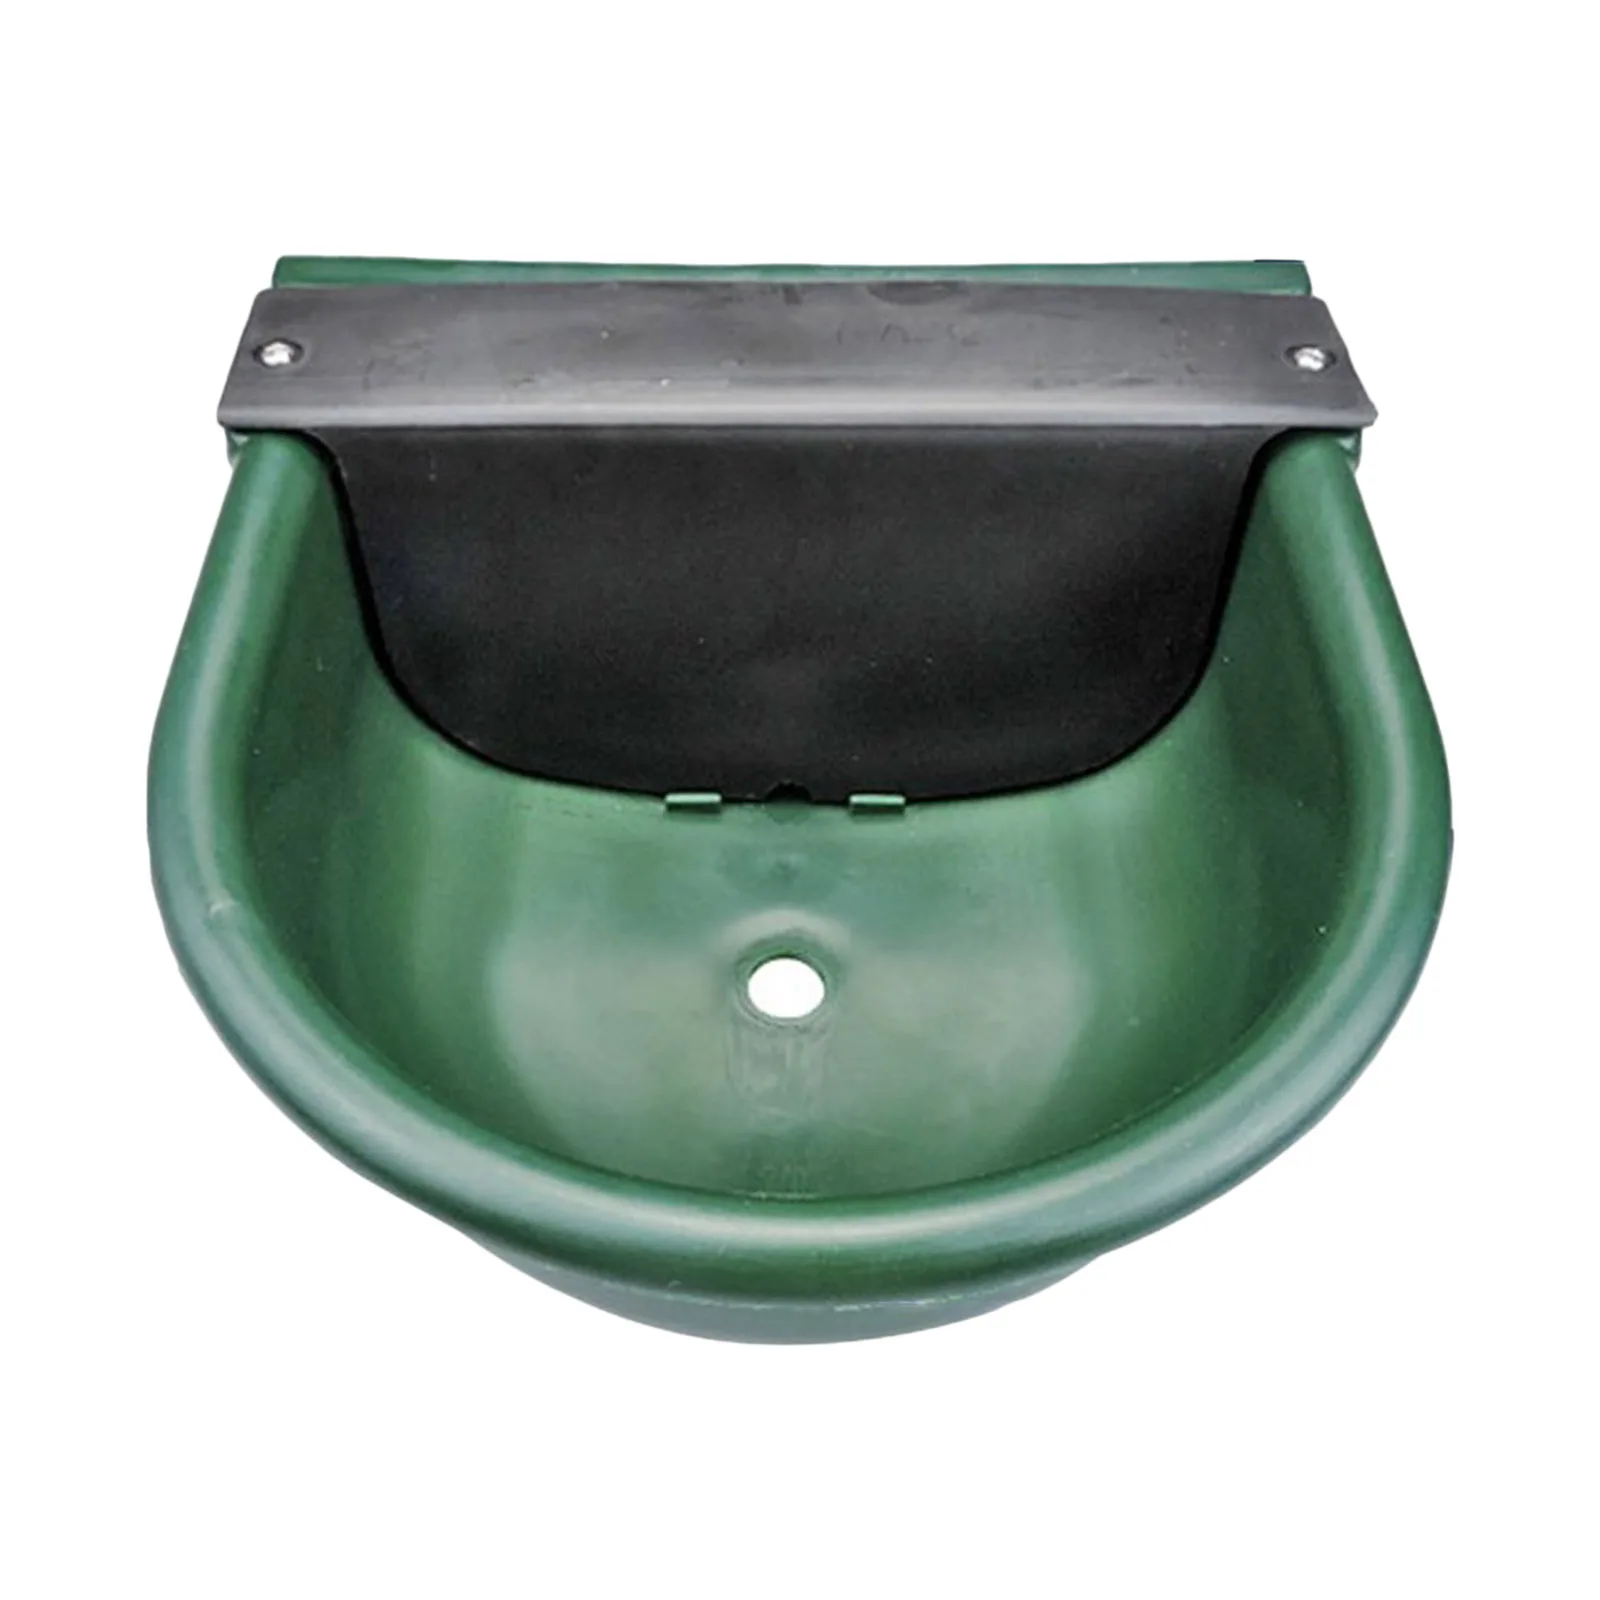 Plastic Automatic Farm Water Bowl Float Valve 4L Drinking Fountain Water Feeder for Cattle Sheep Horse Pet Livestock Tools